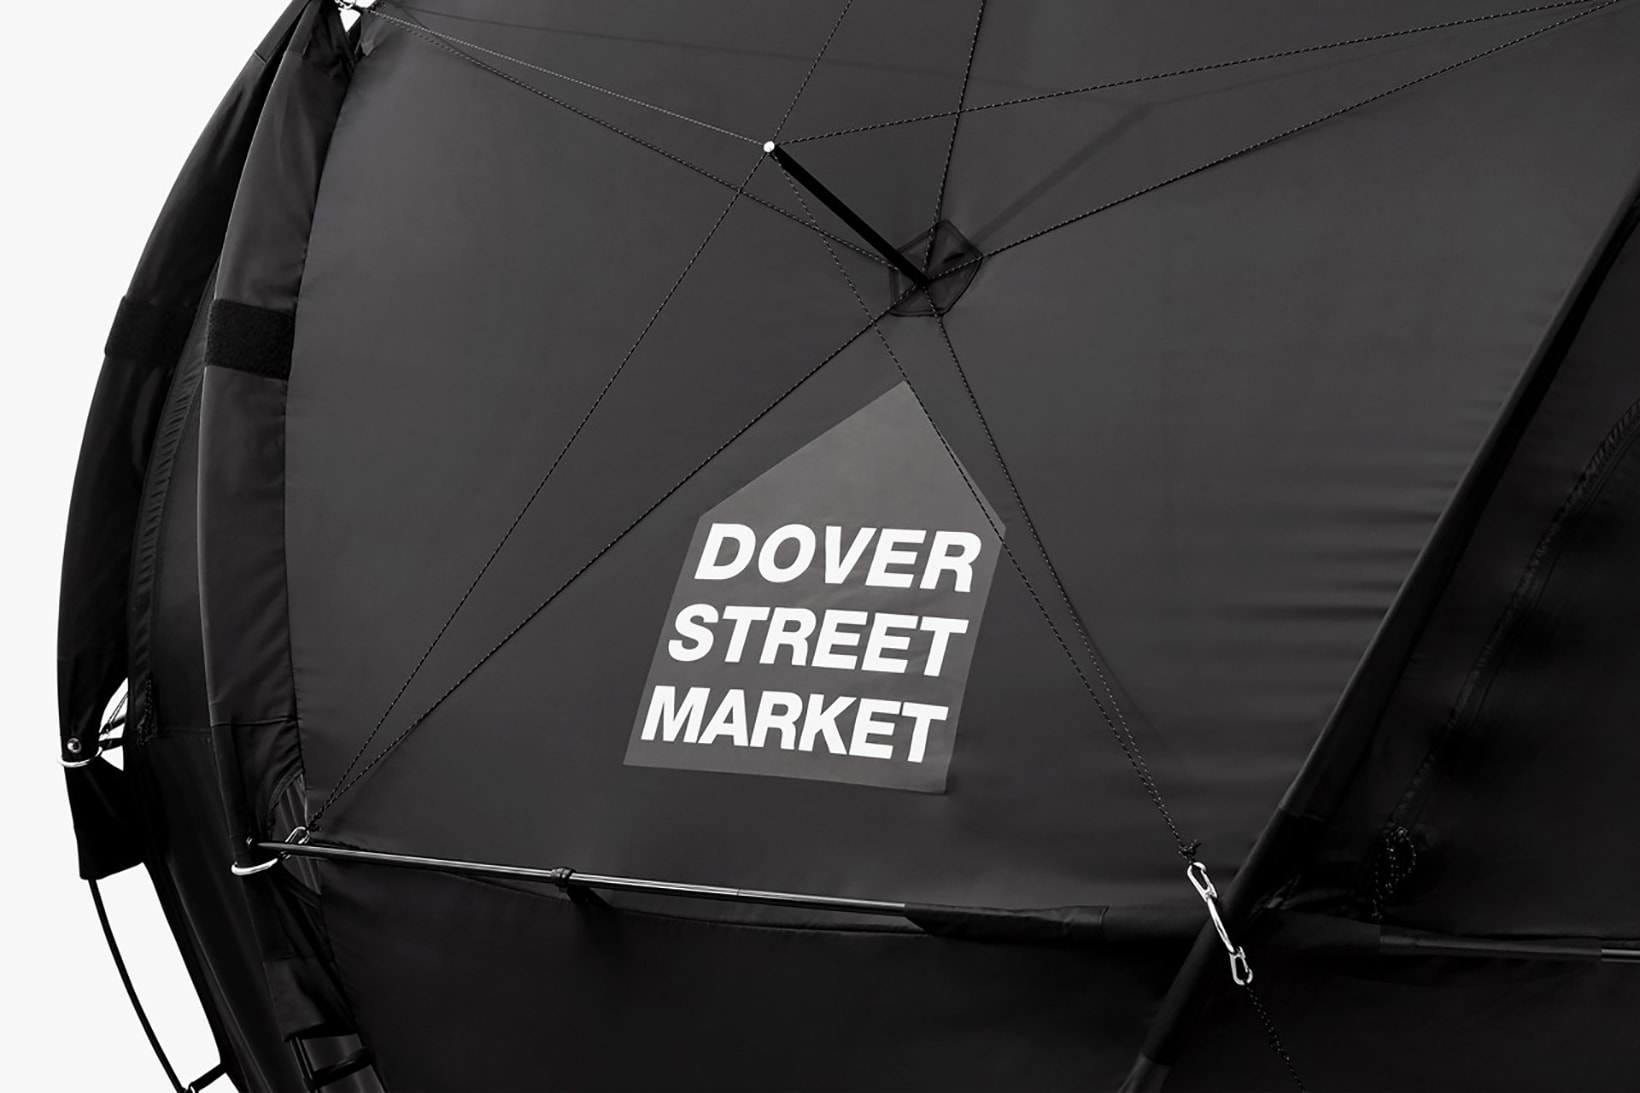 the north face dover street market london geodome tents denali jacket black 